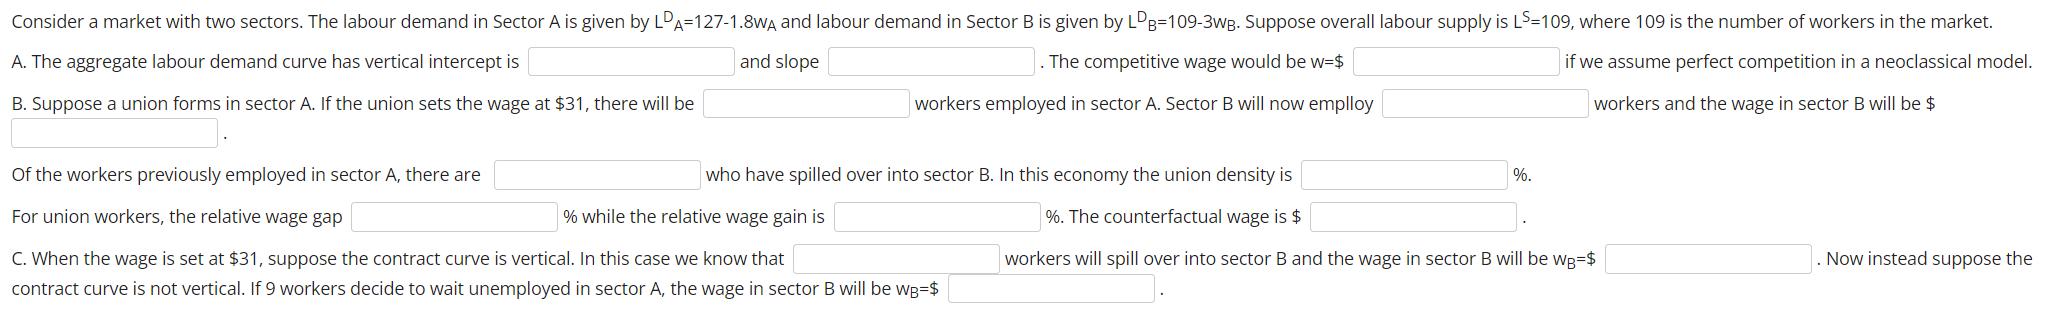 Consider a market with two sectors. The labour demand in Sector A is given by LDA=127-1.8WA and labour demand